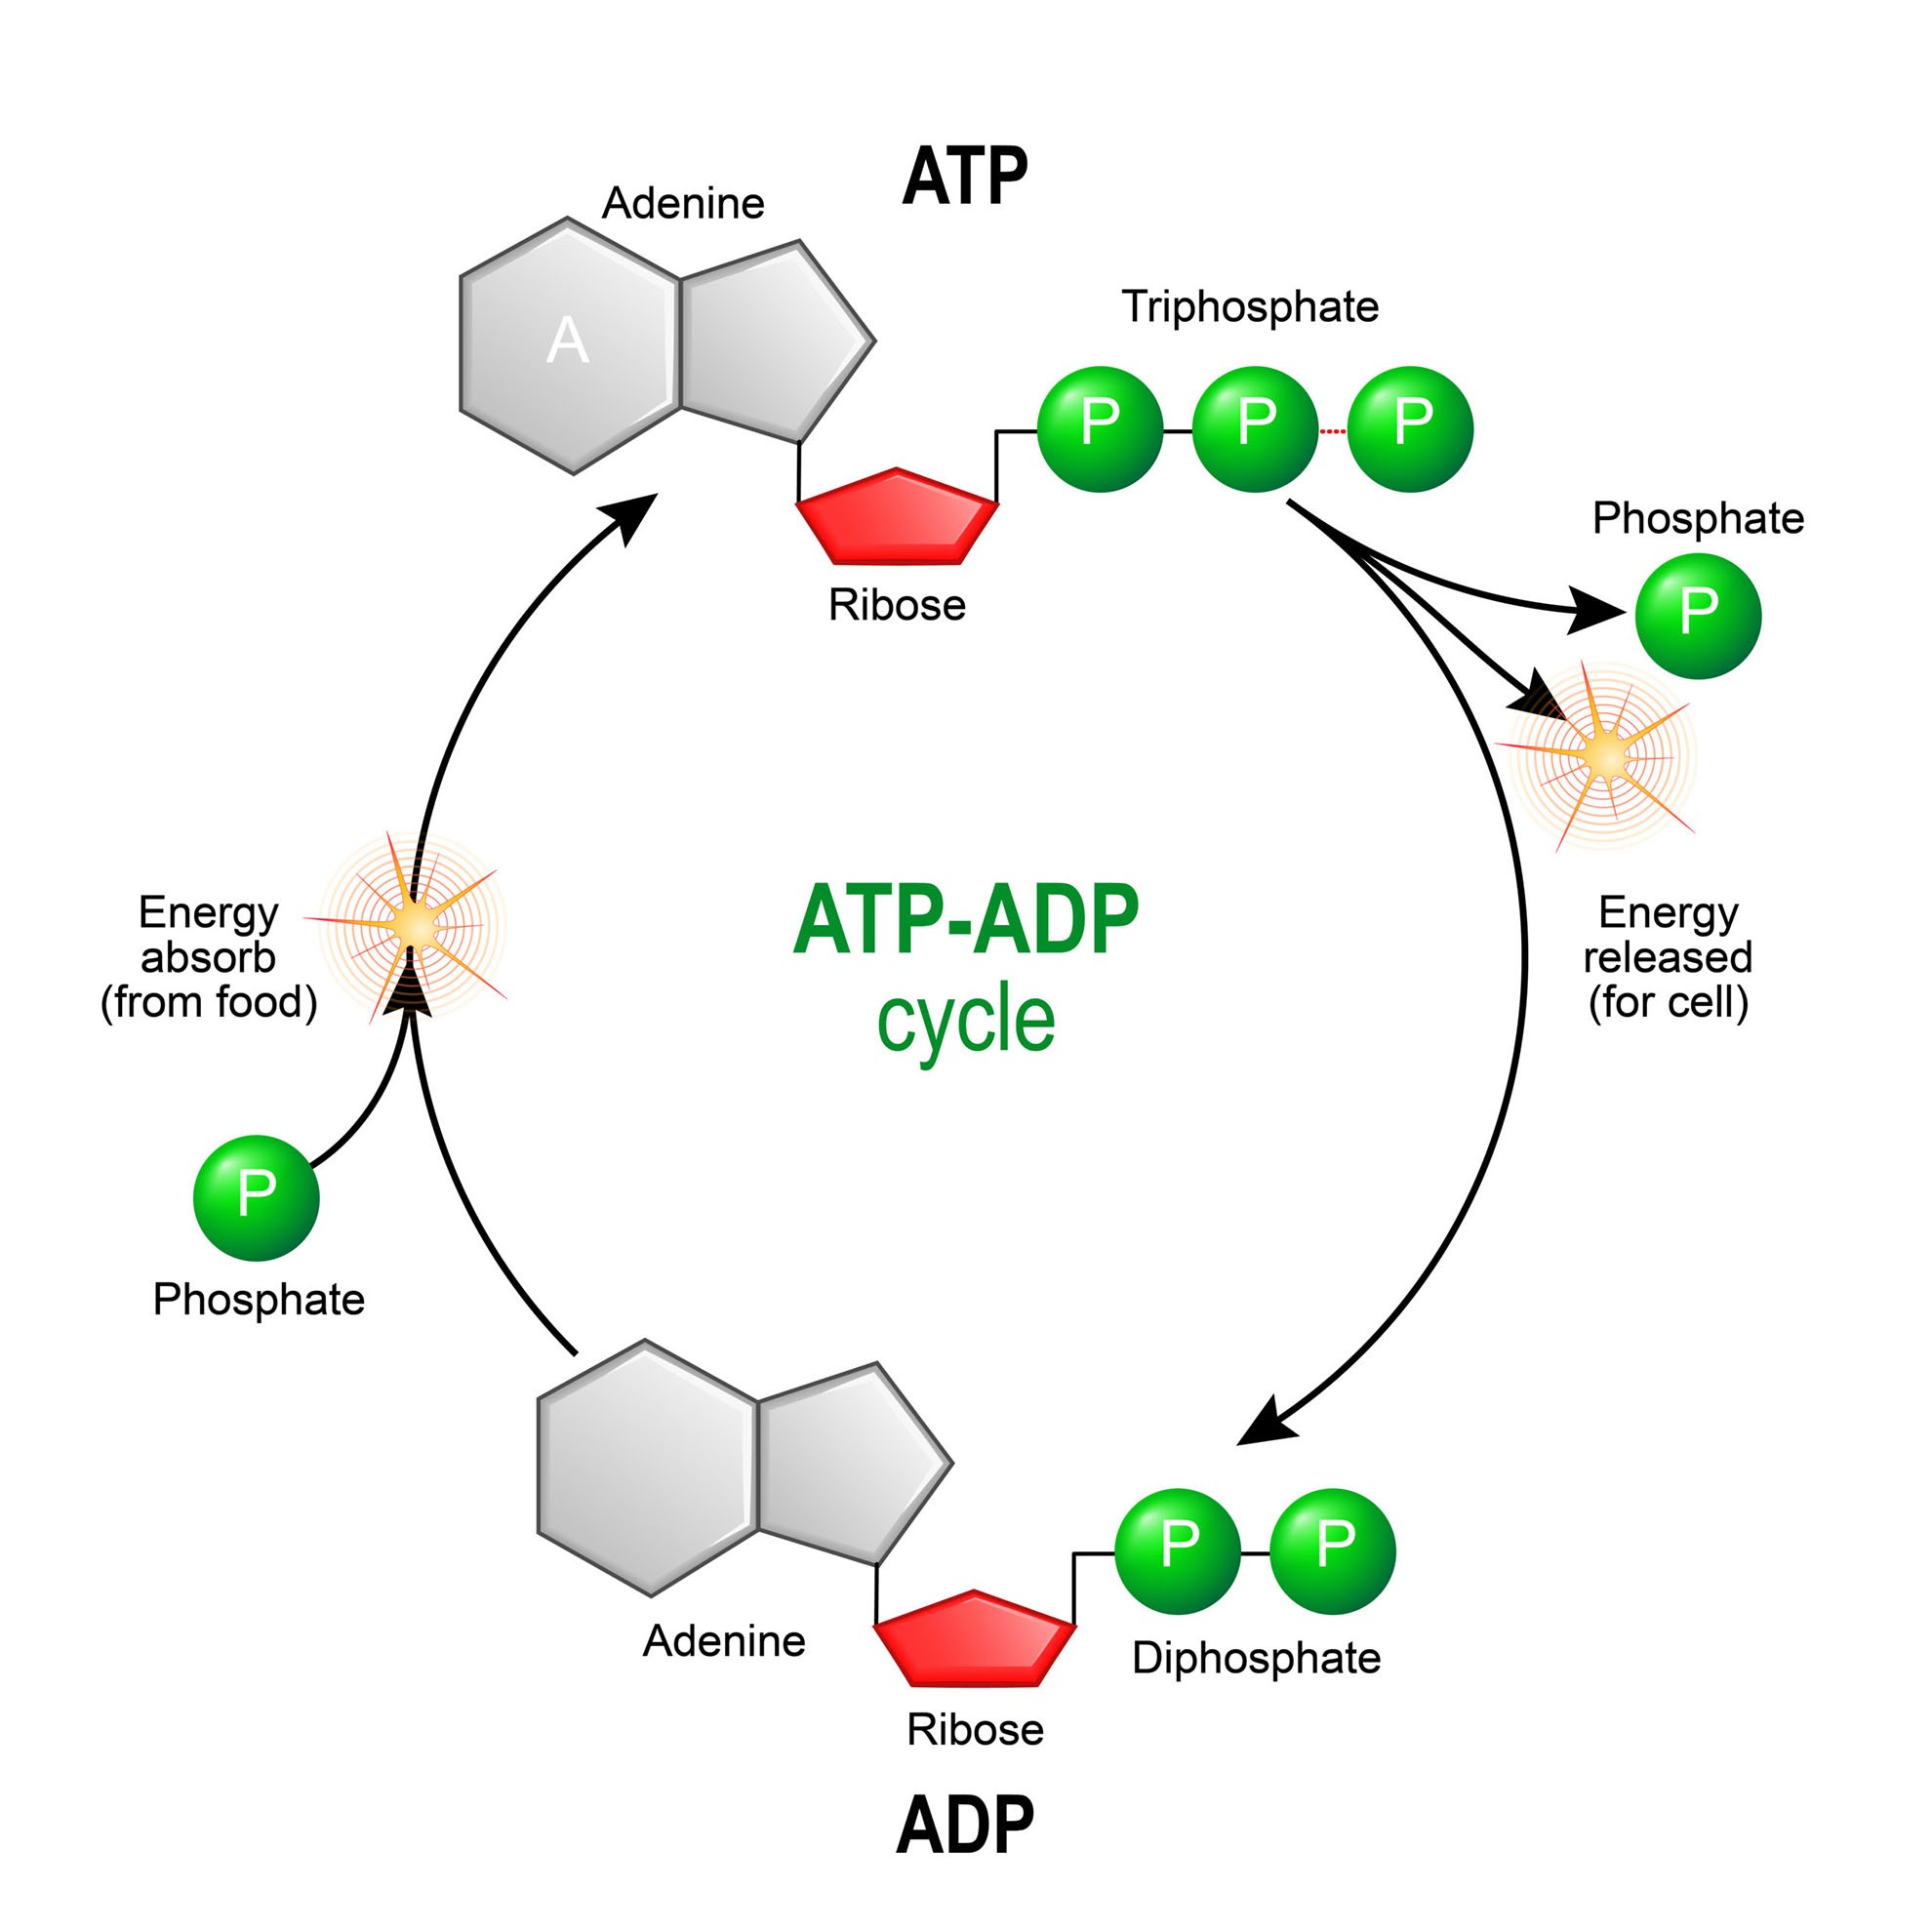 carbohydrate serves as fuel for atp production